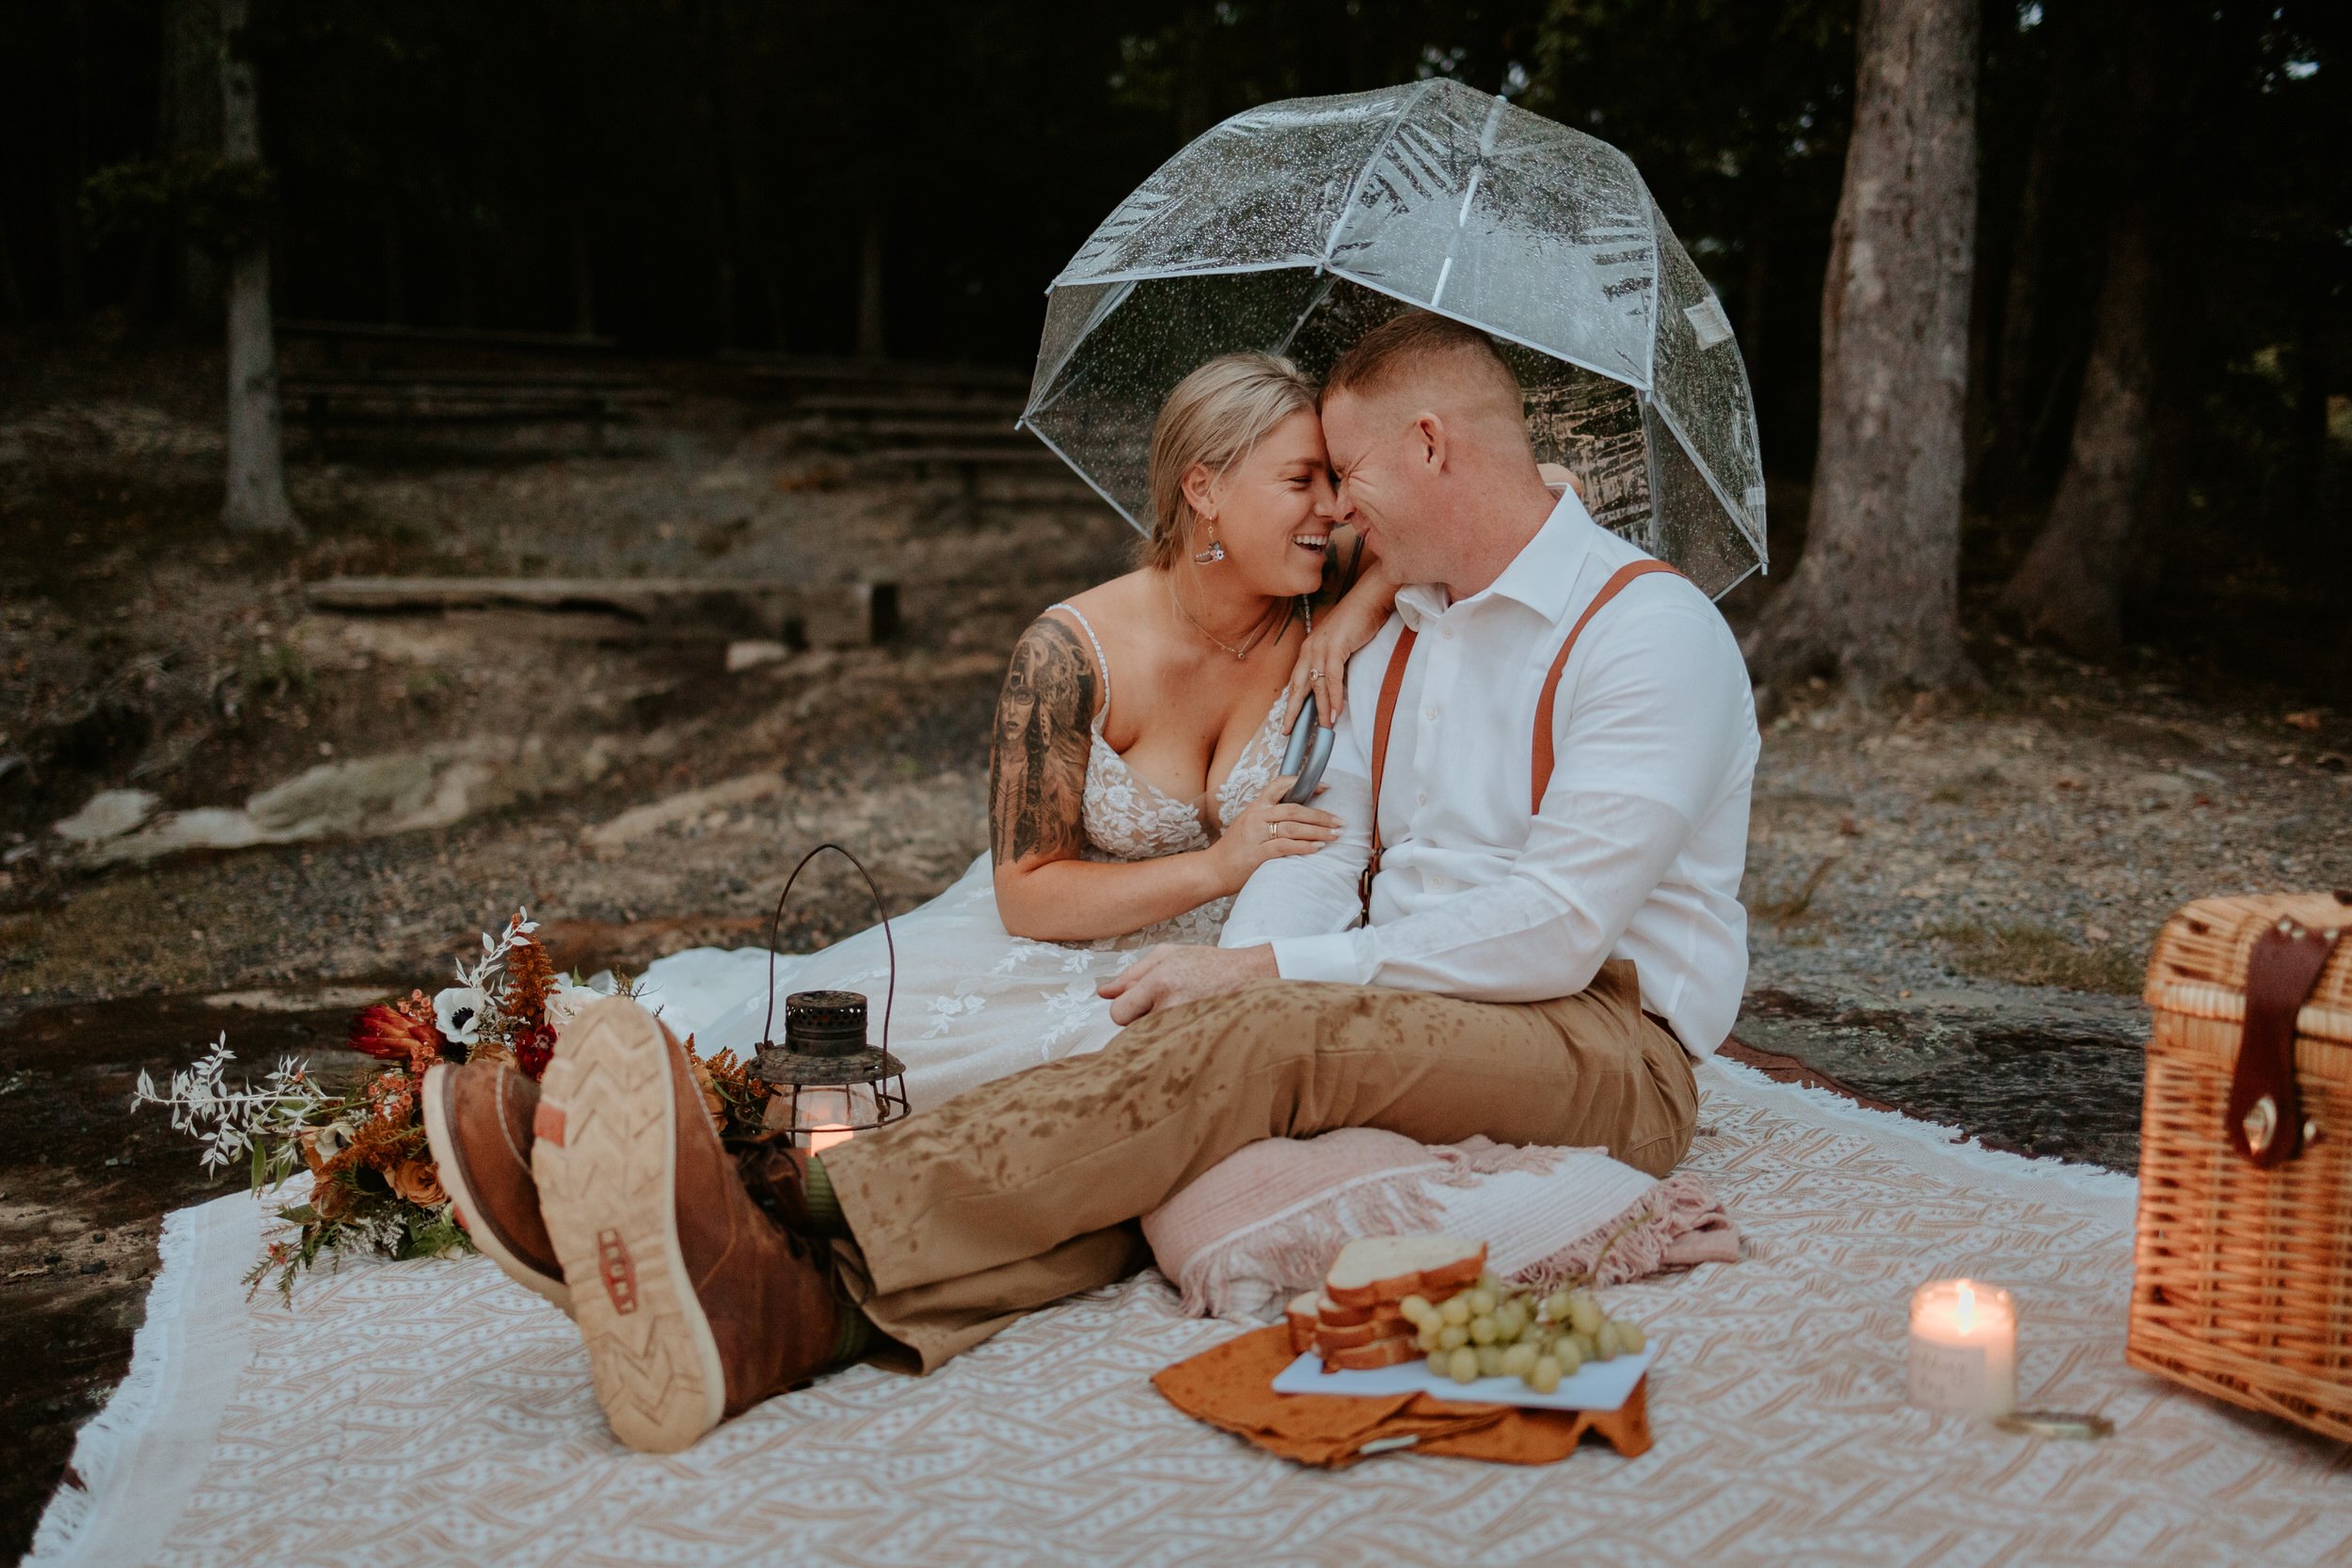 Bride and groom sit on blanket and enjoy candle lit picnic.